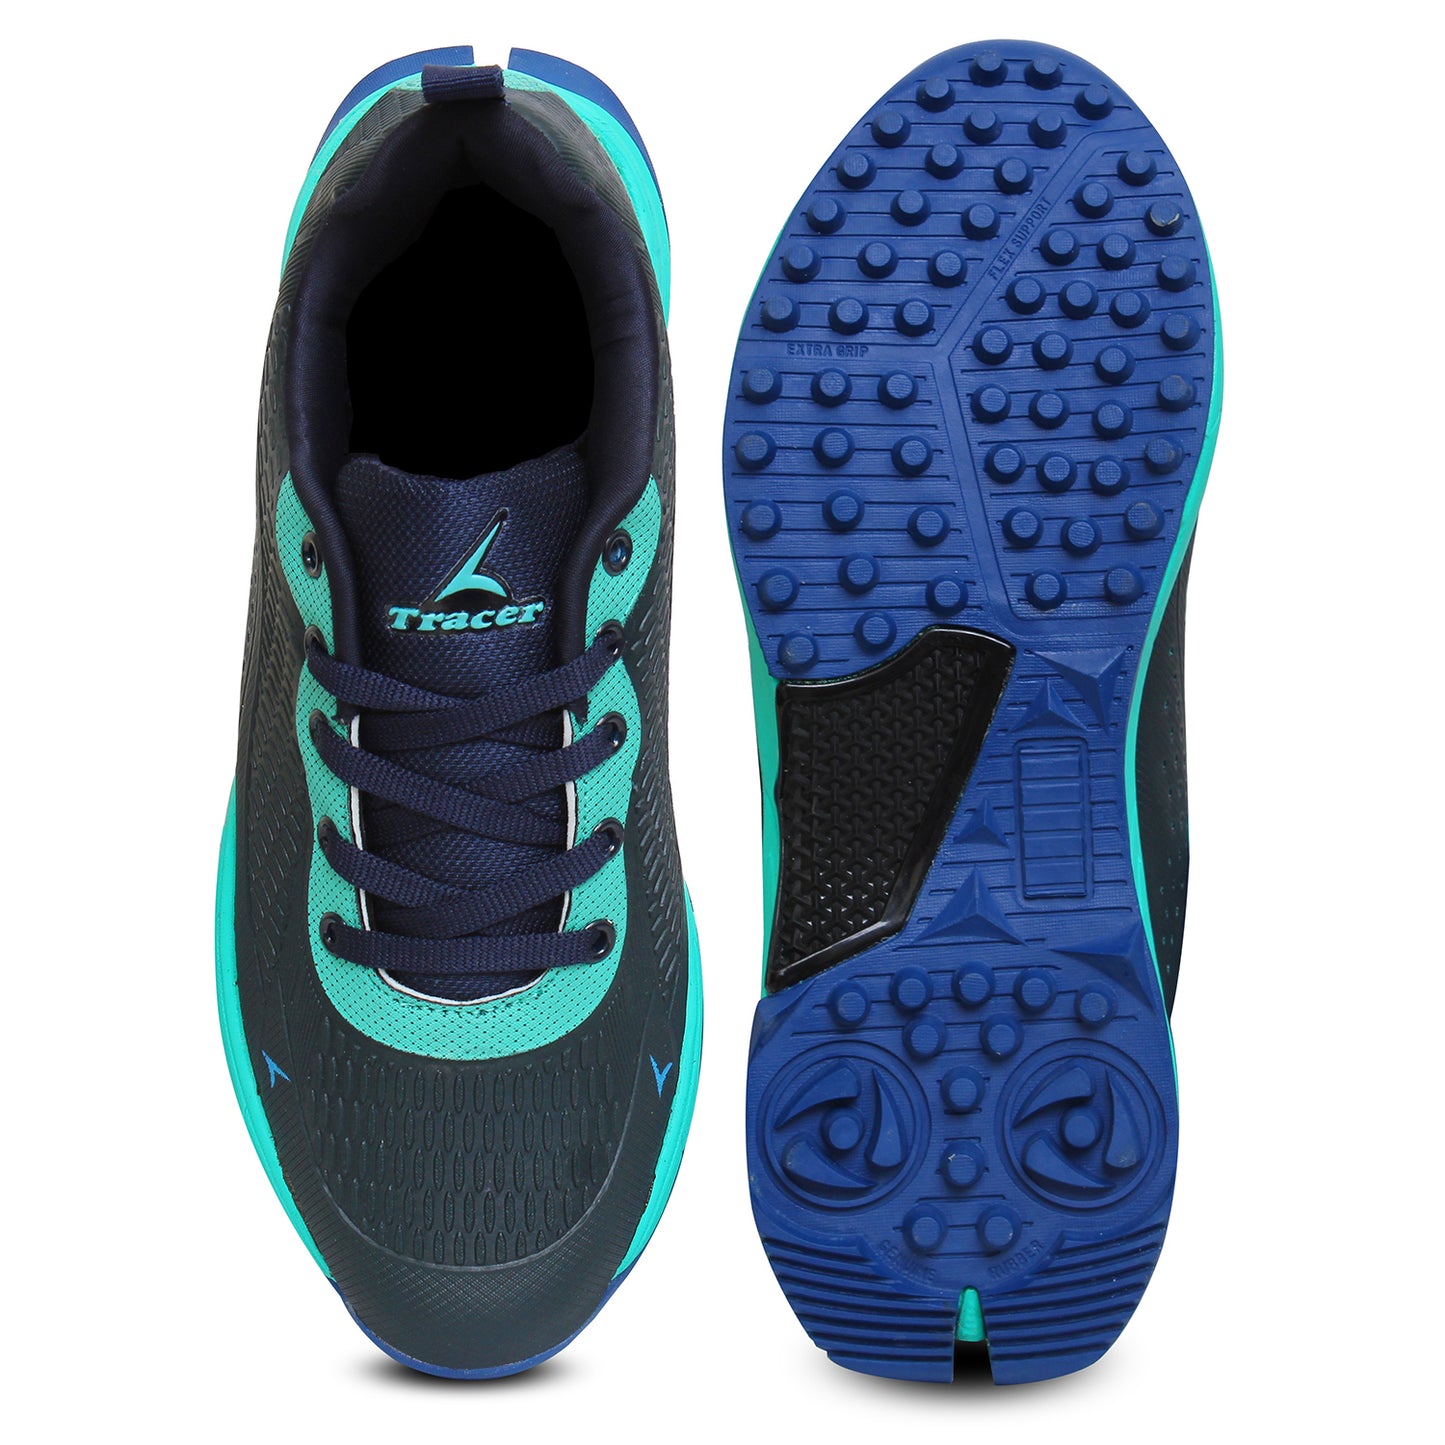 Tracer T-Spinner 194 Cricket Shoes in Navy Color\